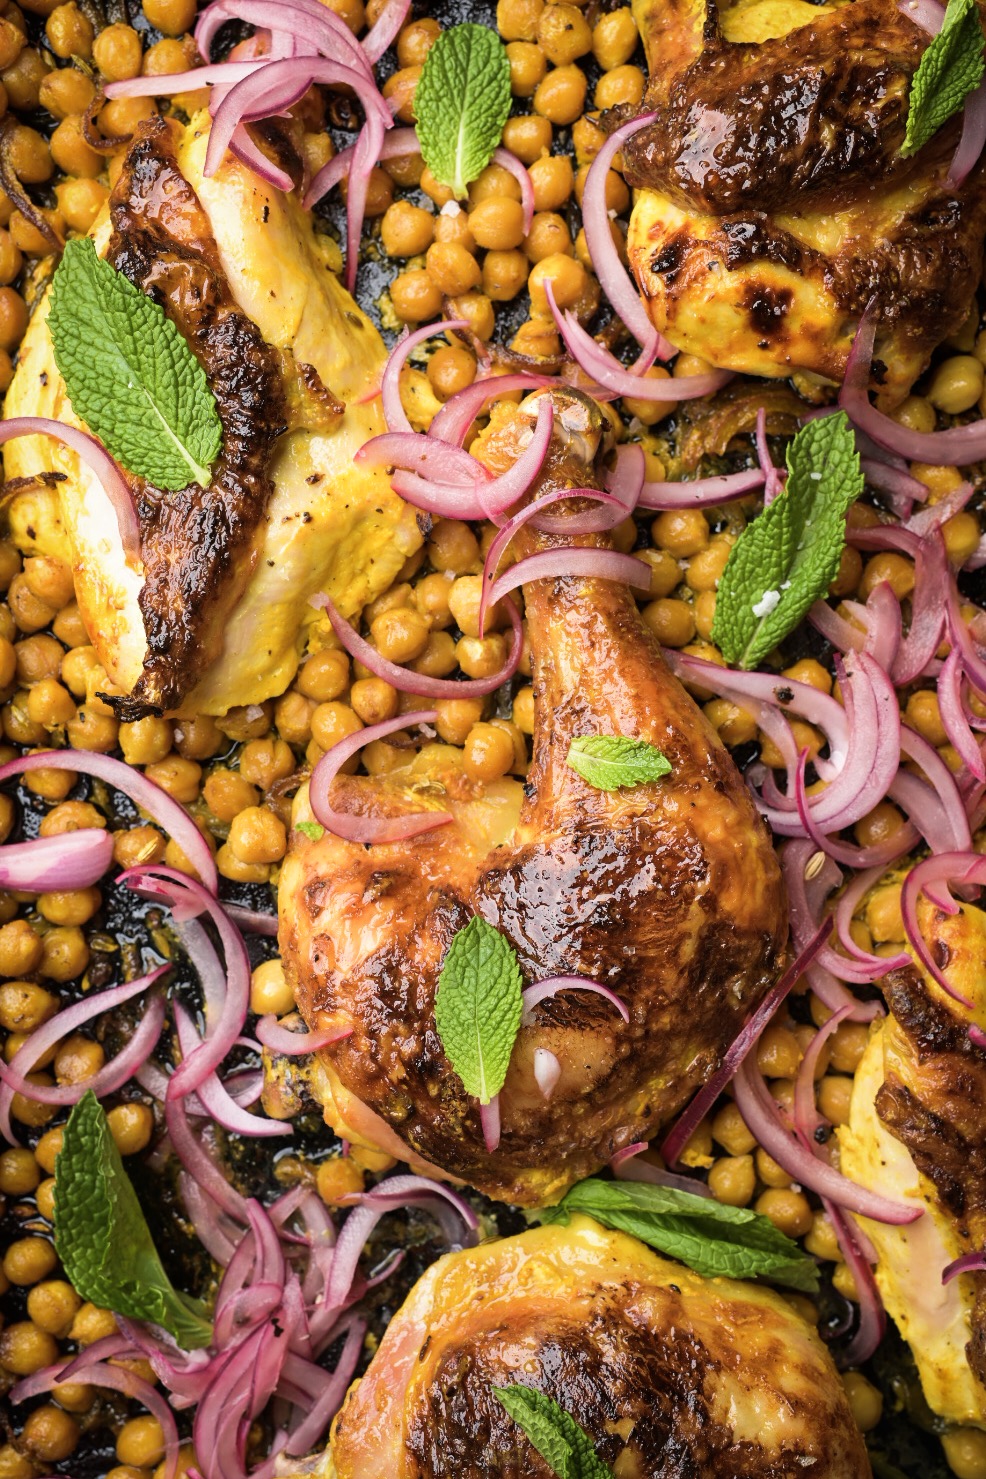 Roasted chicken with turmeric and Greek yogurt, chickpeas, pickled onions and fresh mint